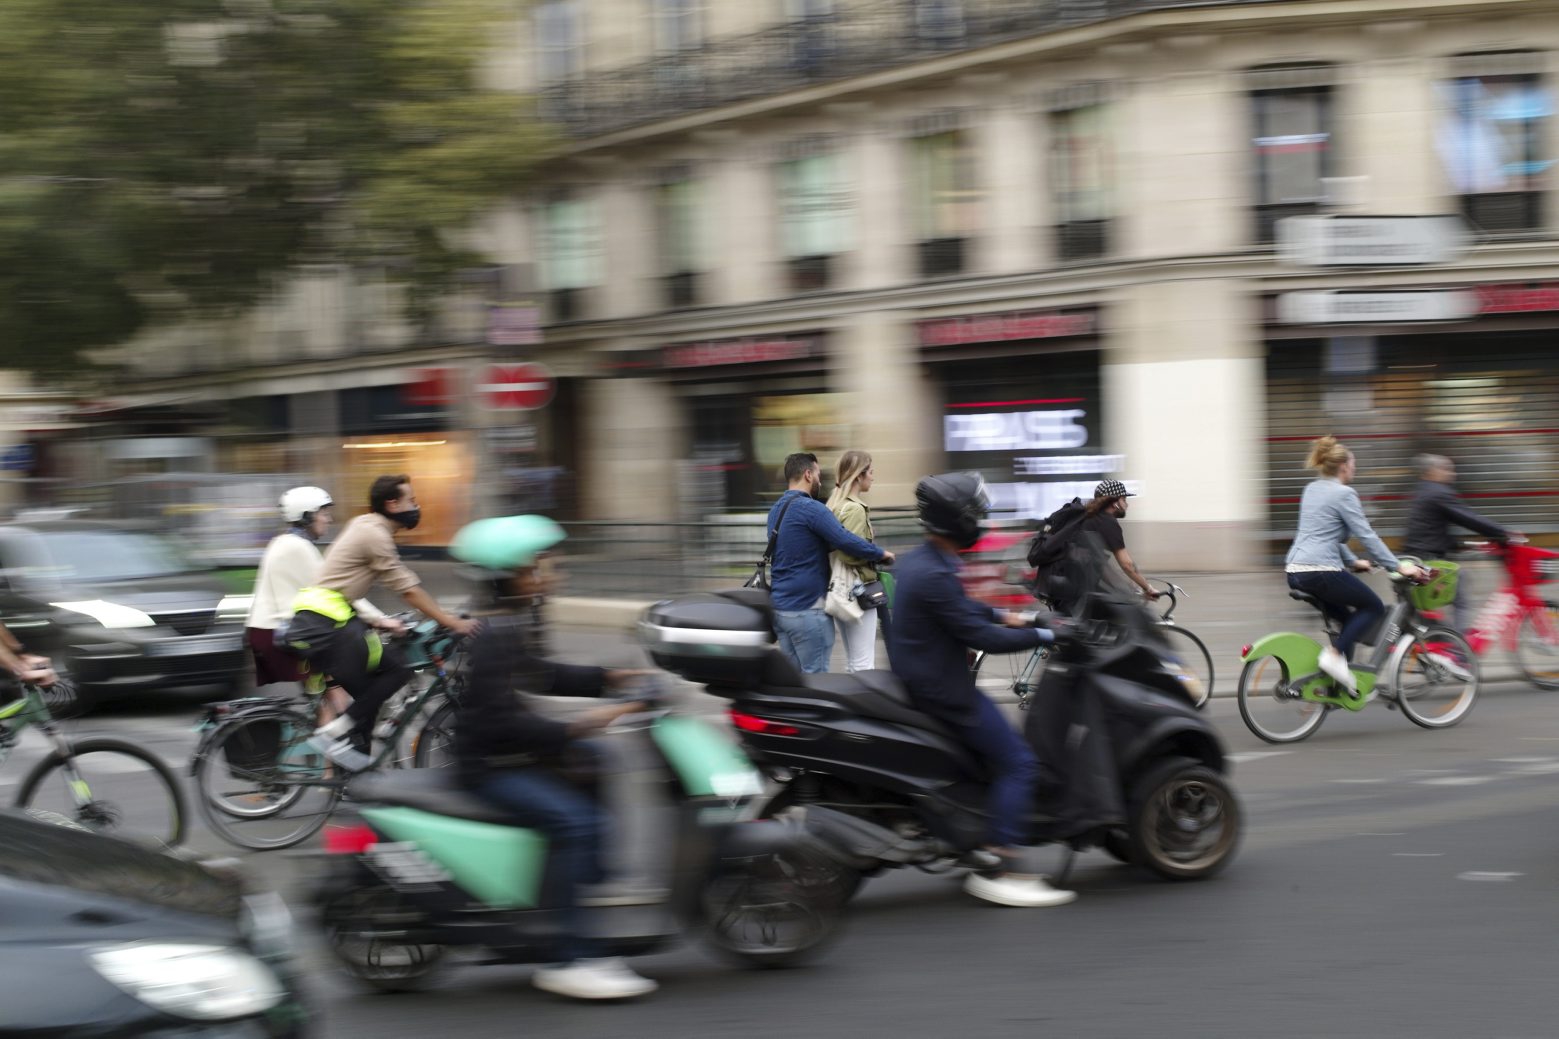 People ride bicycles and scooters in a street of Paris, Friday, Sept. 13, 2019. Paris metro warns over major strike, transport chaos Friday. (AP Photo/Thibault Camus) France Strike